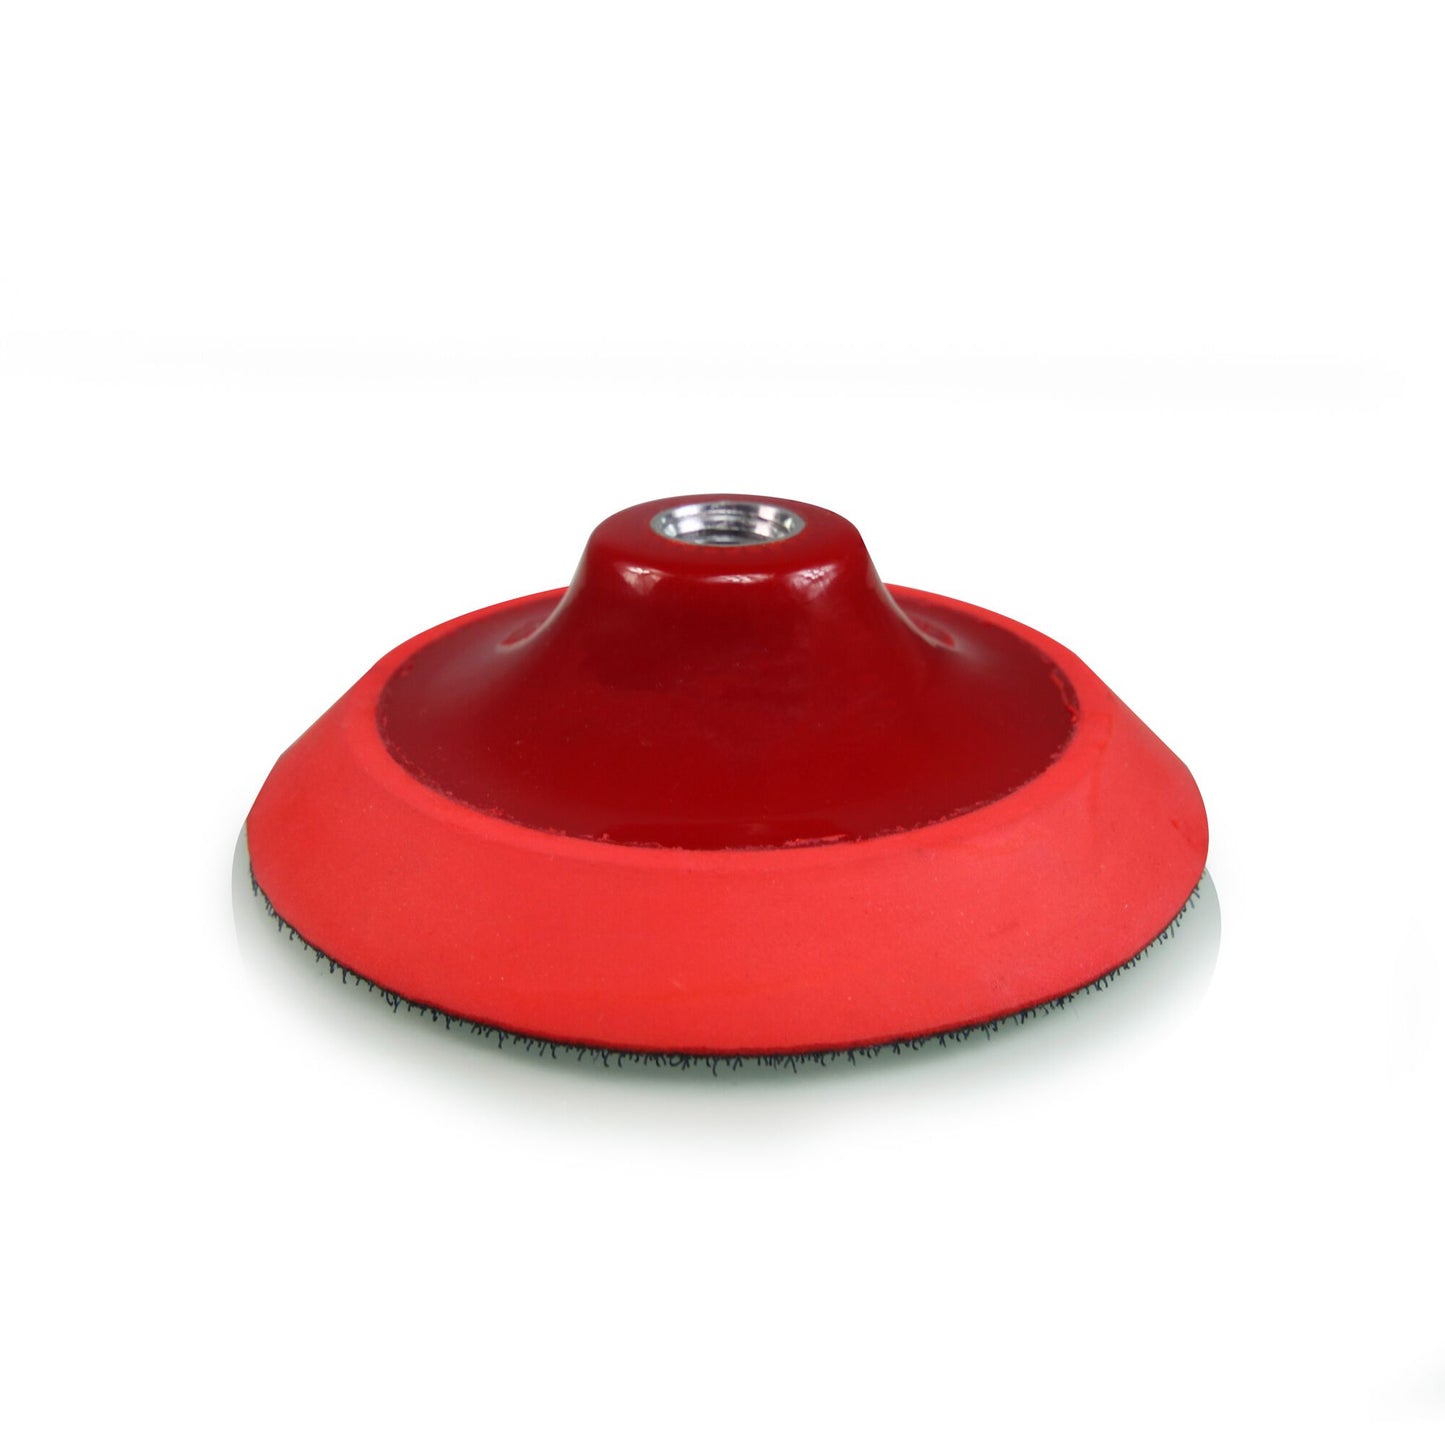 TORQ R5 Rotary Red Backing Plate with Hyper Flex Technology